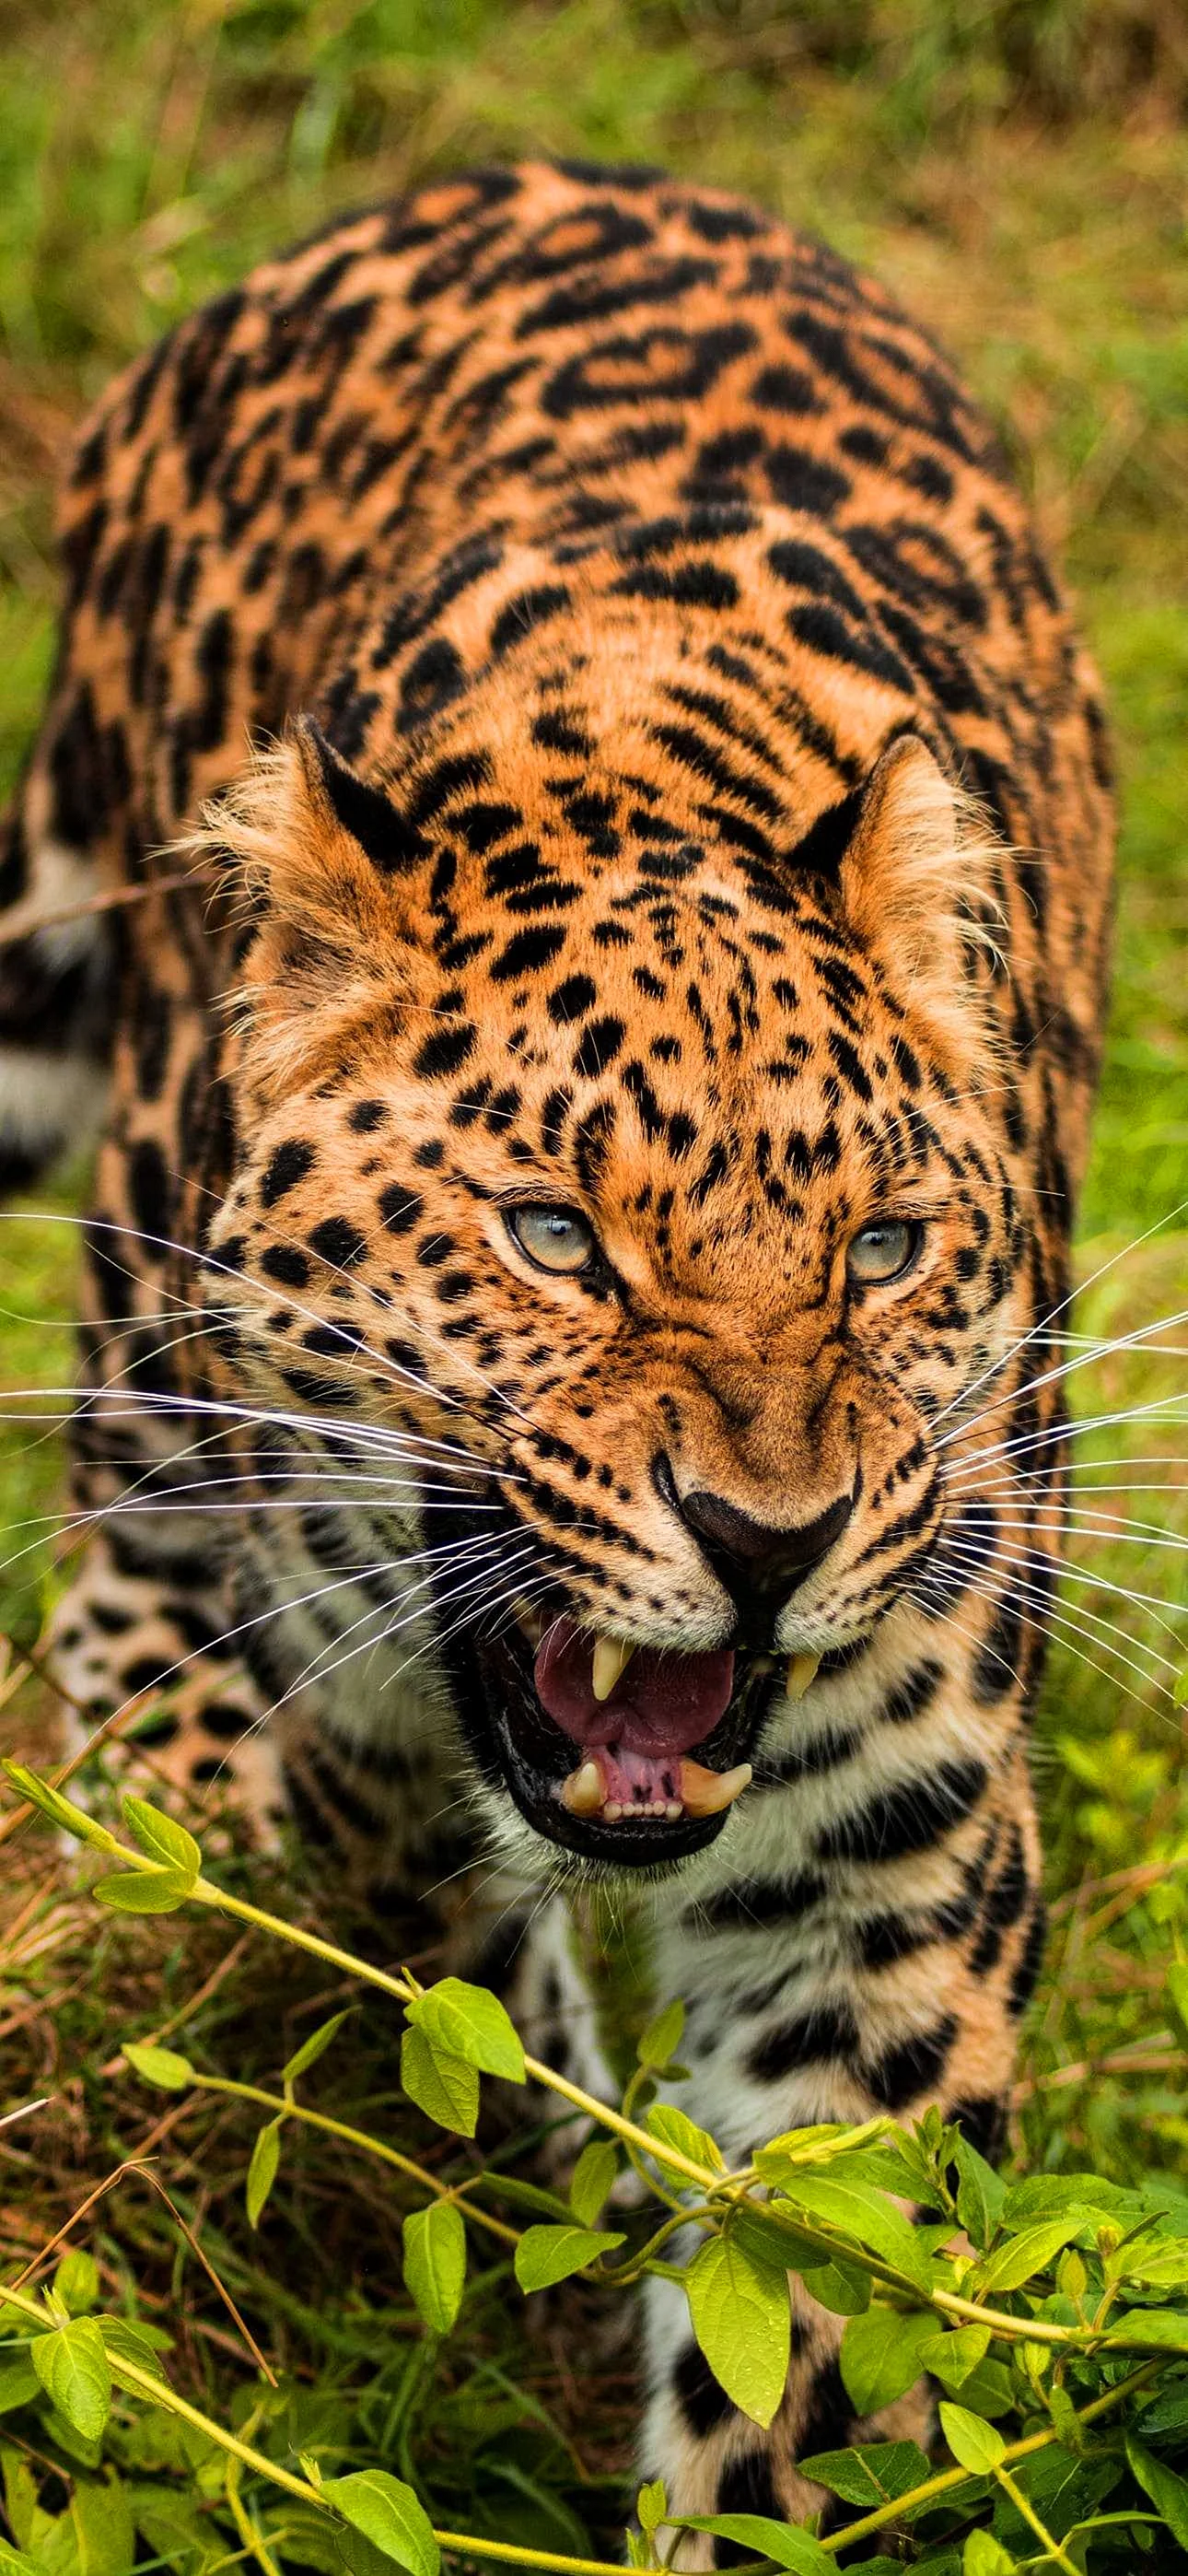 Leopard 4k Wallpaper for iPhone 14 Pro Max